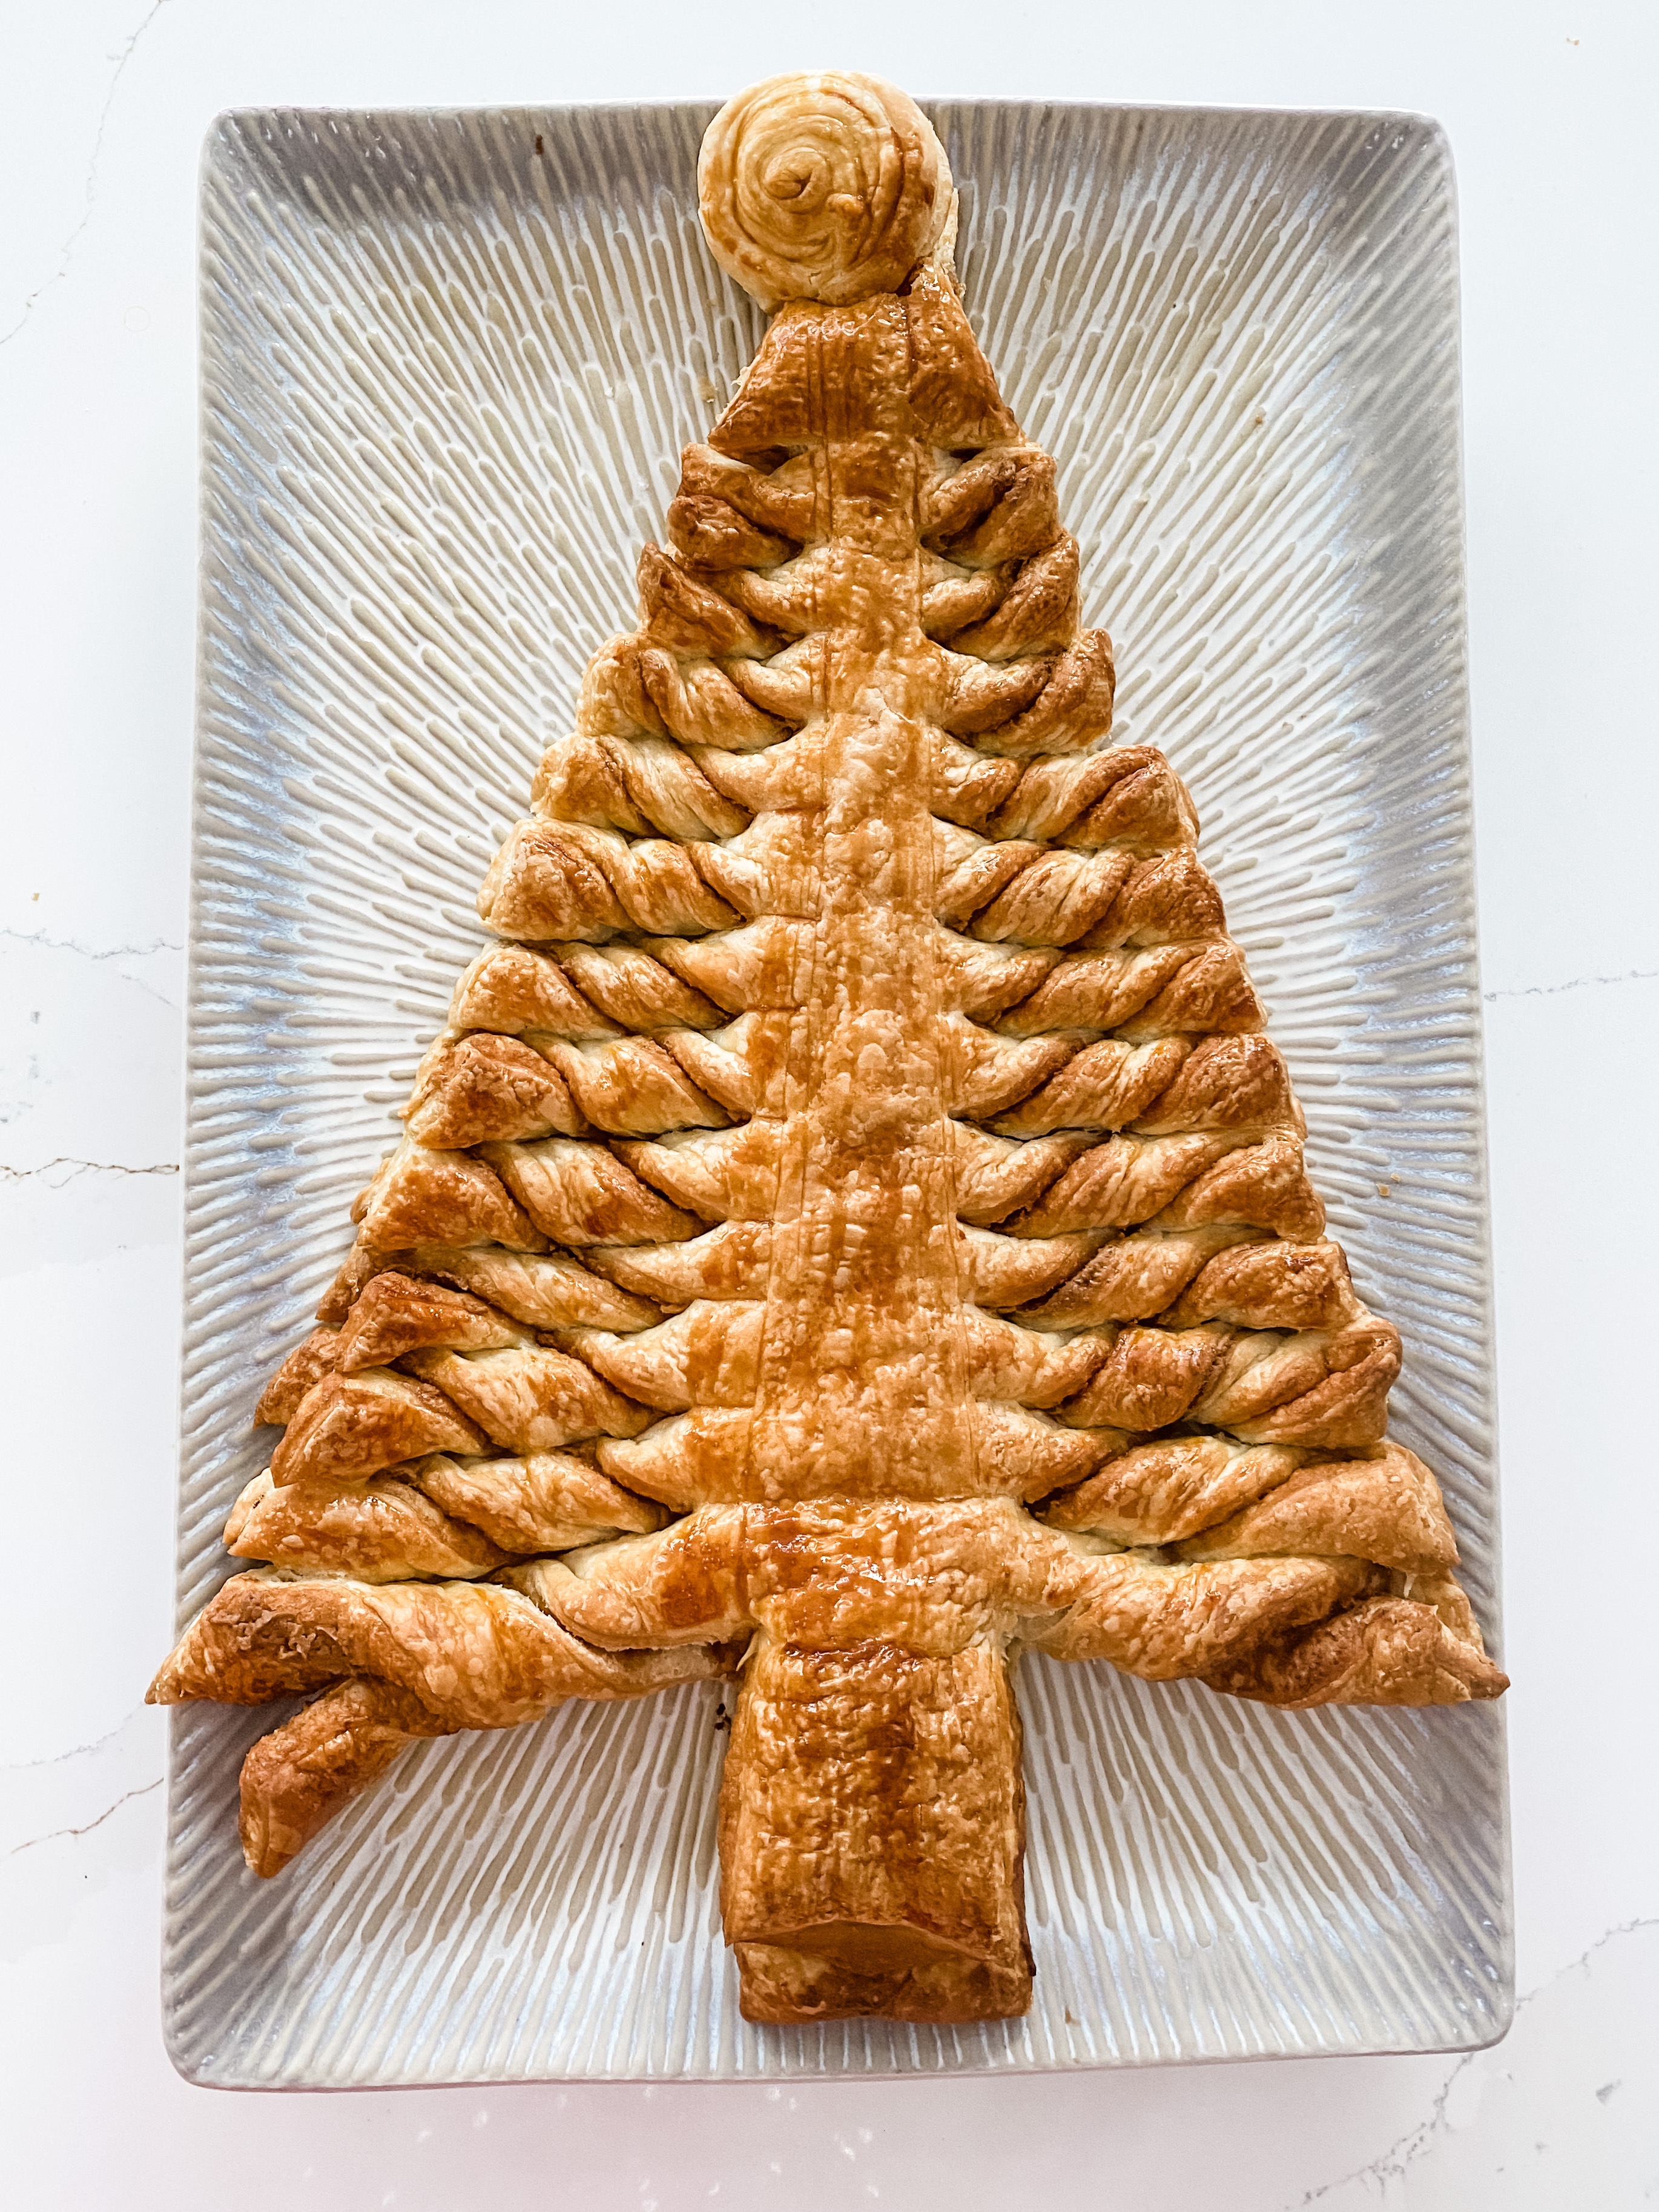 A puff pastry Christmas tree fresh from the oven and perfectly browned